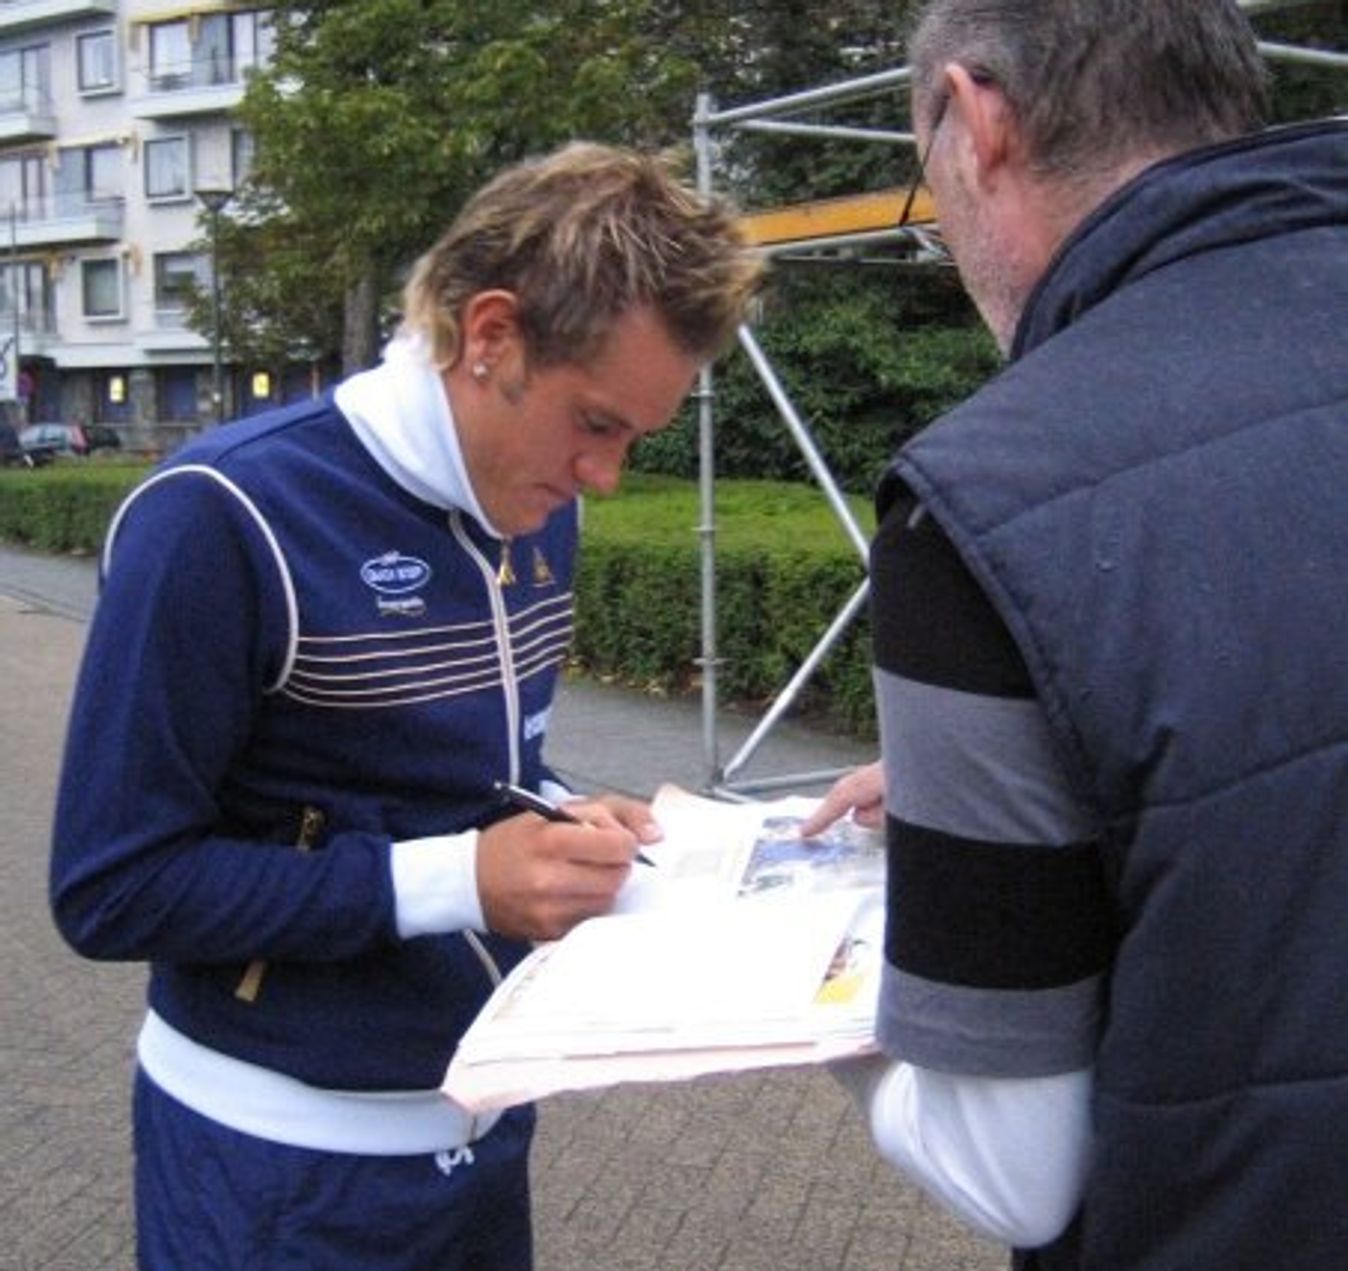 Wouter always had time for his fans